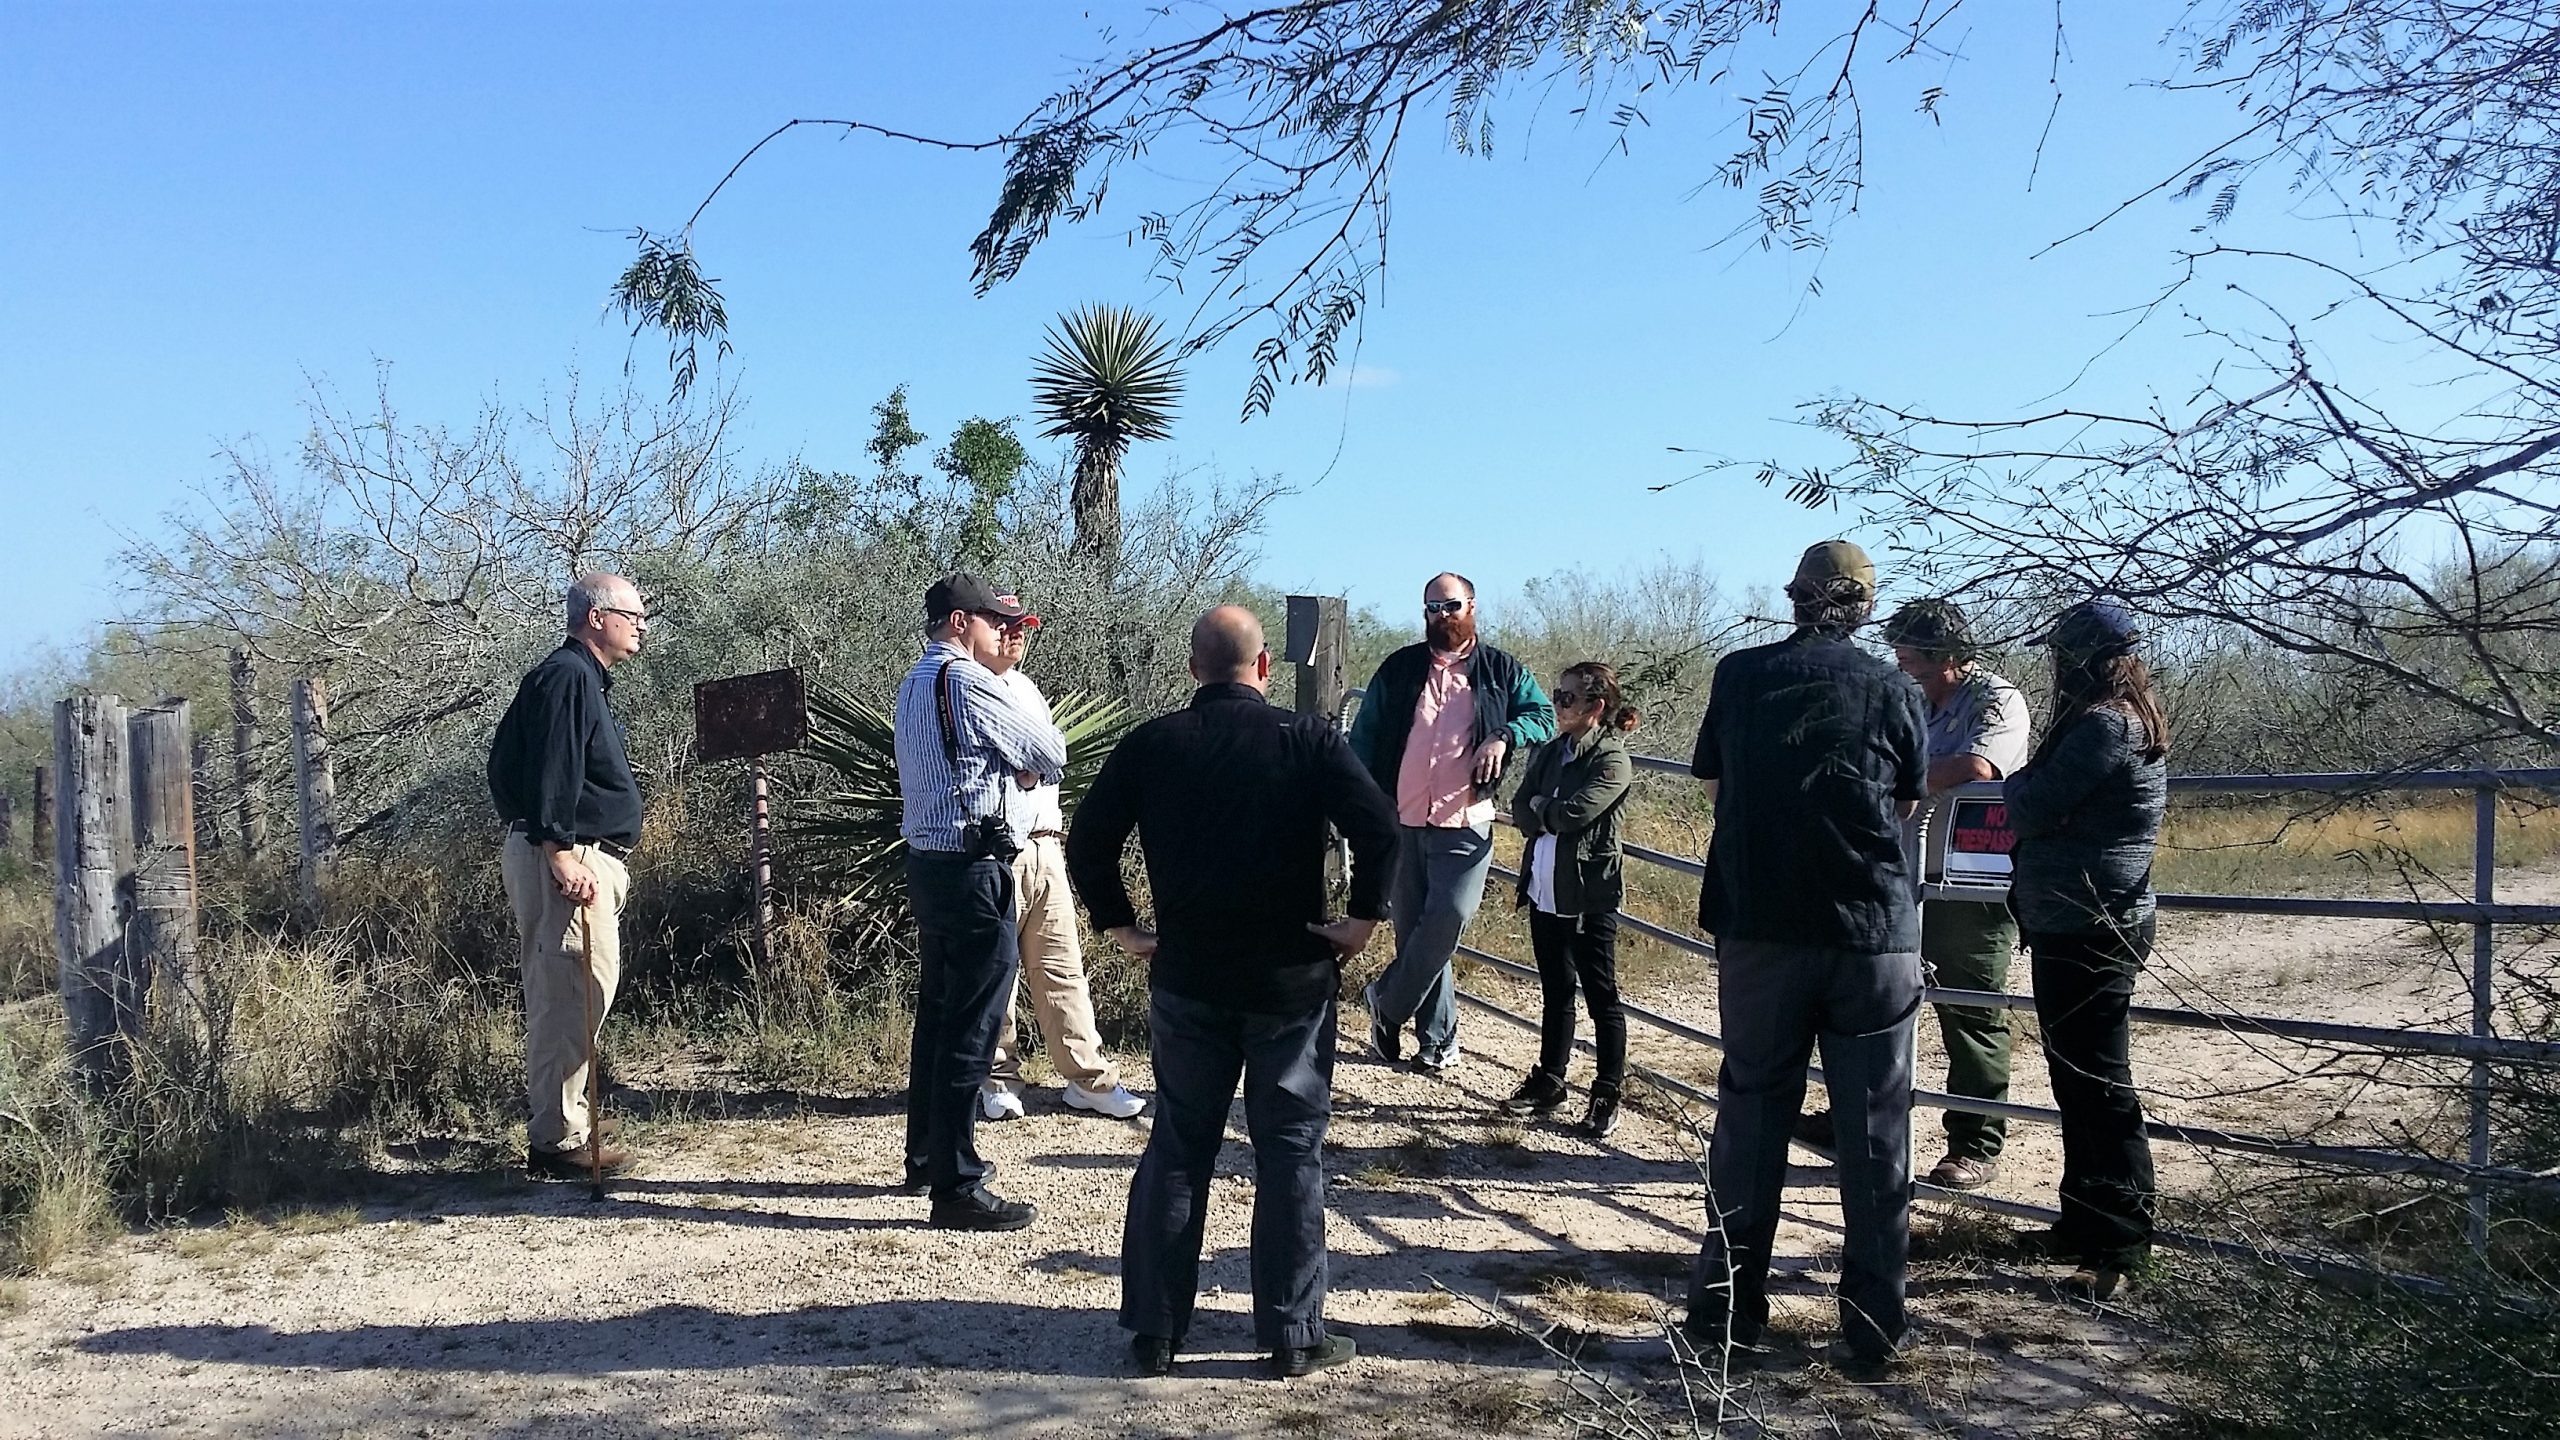 Discussion with project stakeholders on Palmito Ranch battlefield site 